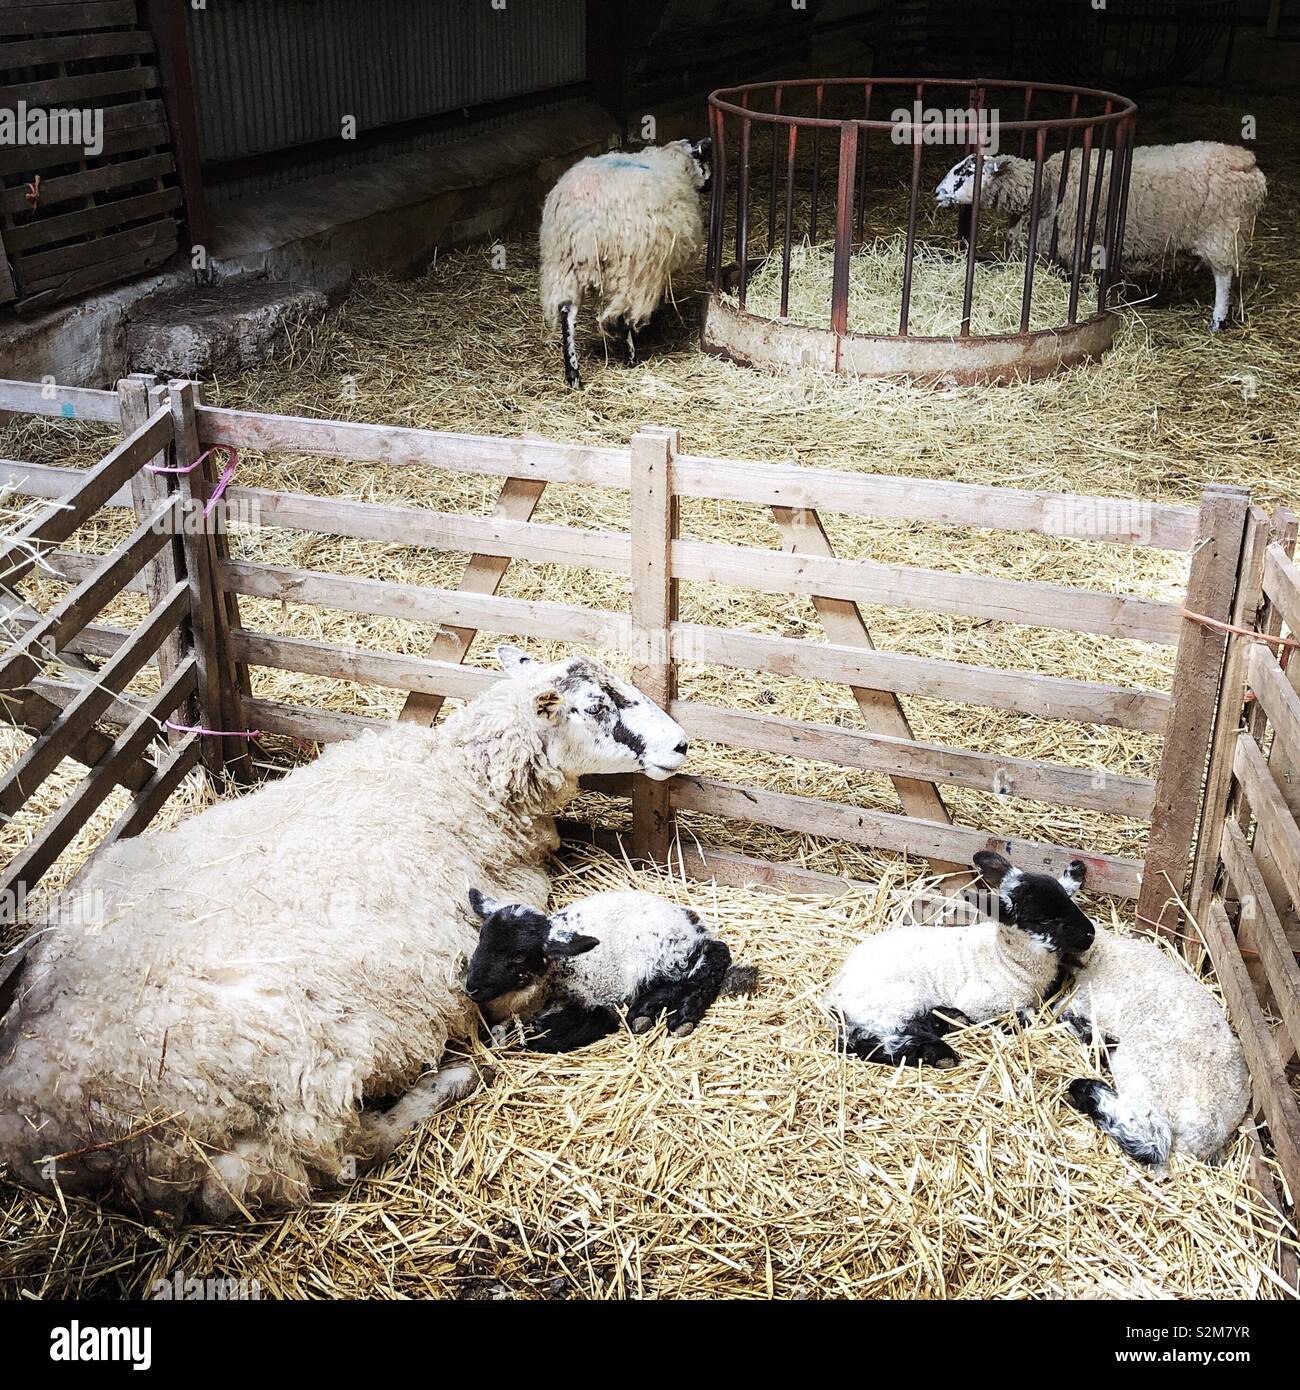 North Country Mule ewe with triplet lambs, North Yorkshire, United Kingdom Stock Photo